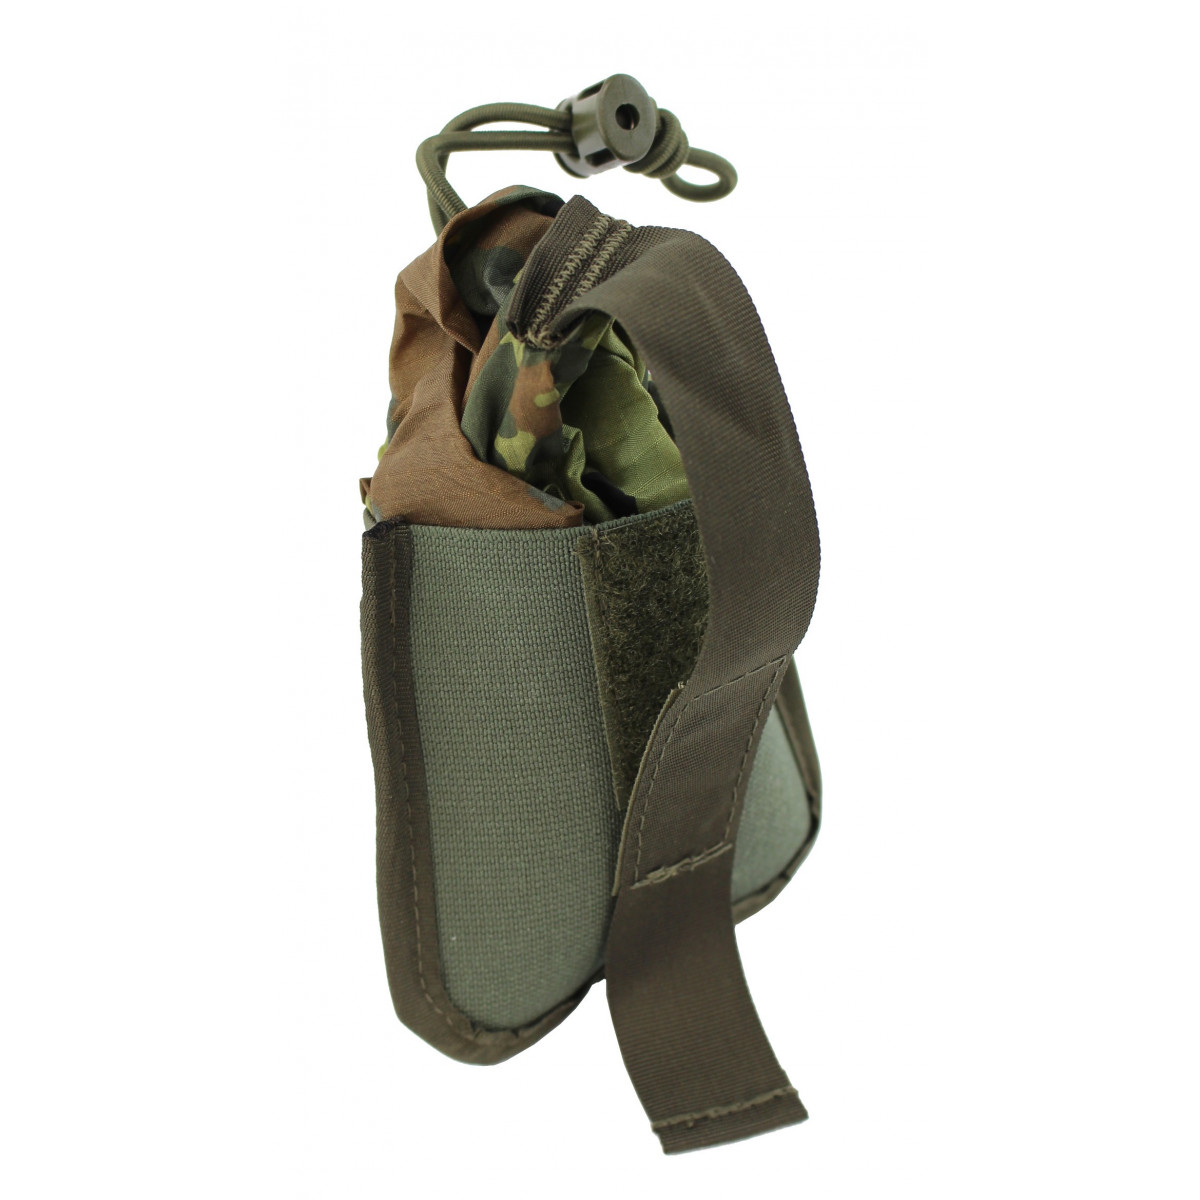 Dump pouch light version 5 liters for ammunition and magazines MOLLE compatible